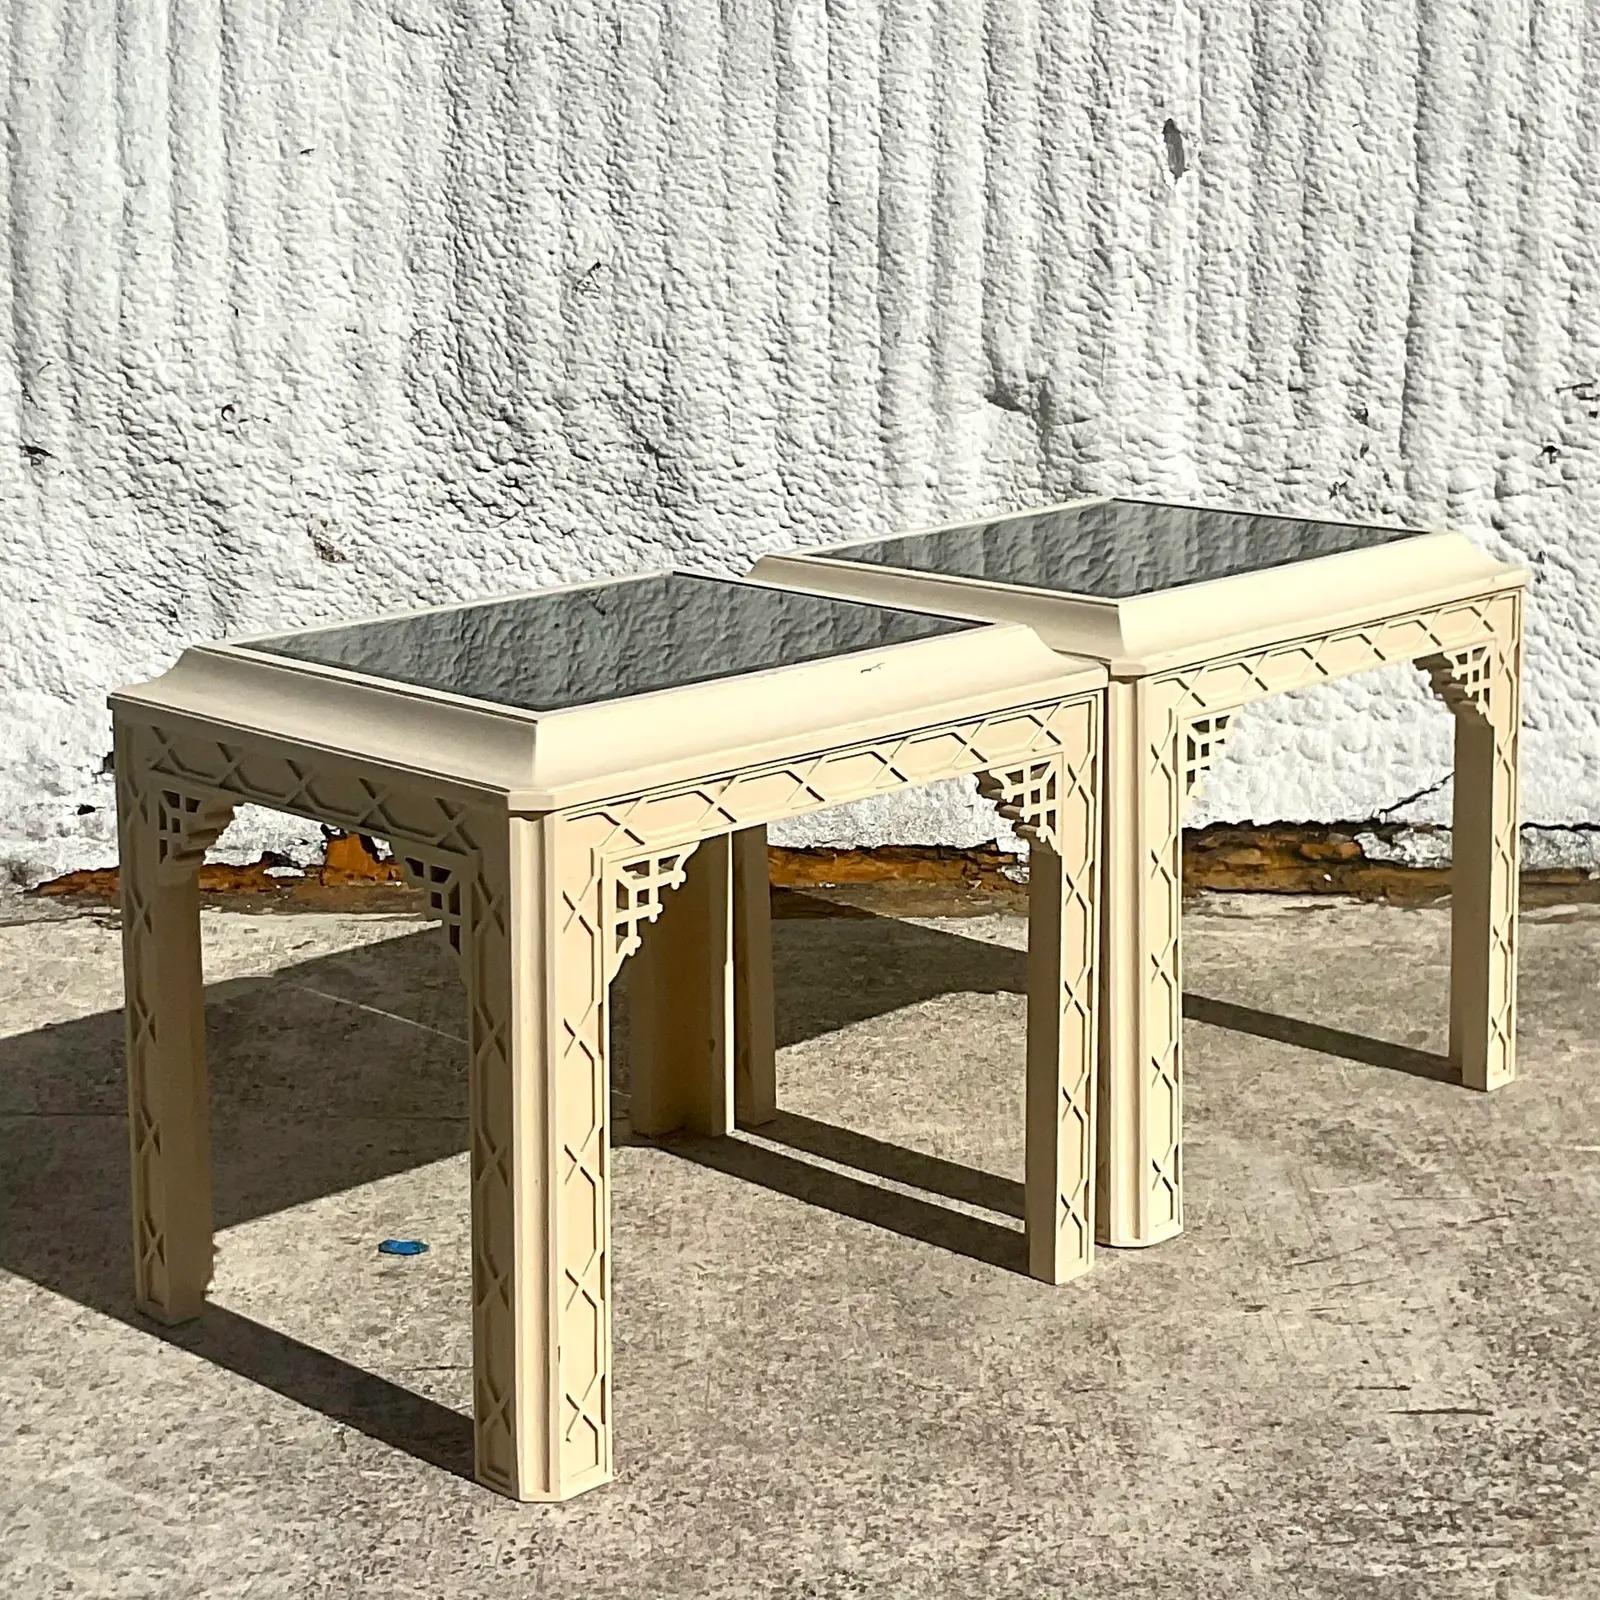 Vintage Regency Fretwork Side Tables - a Pair In Good Condition For Sale In west palm beach, FL